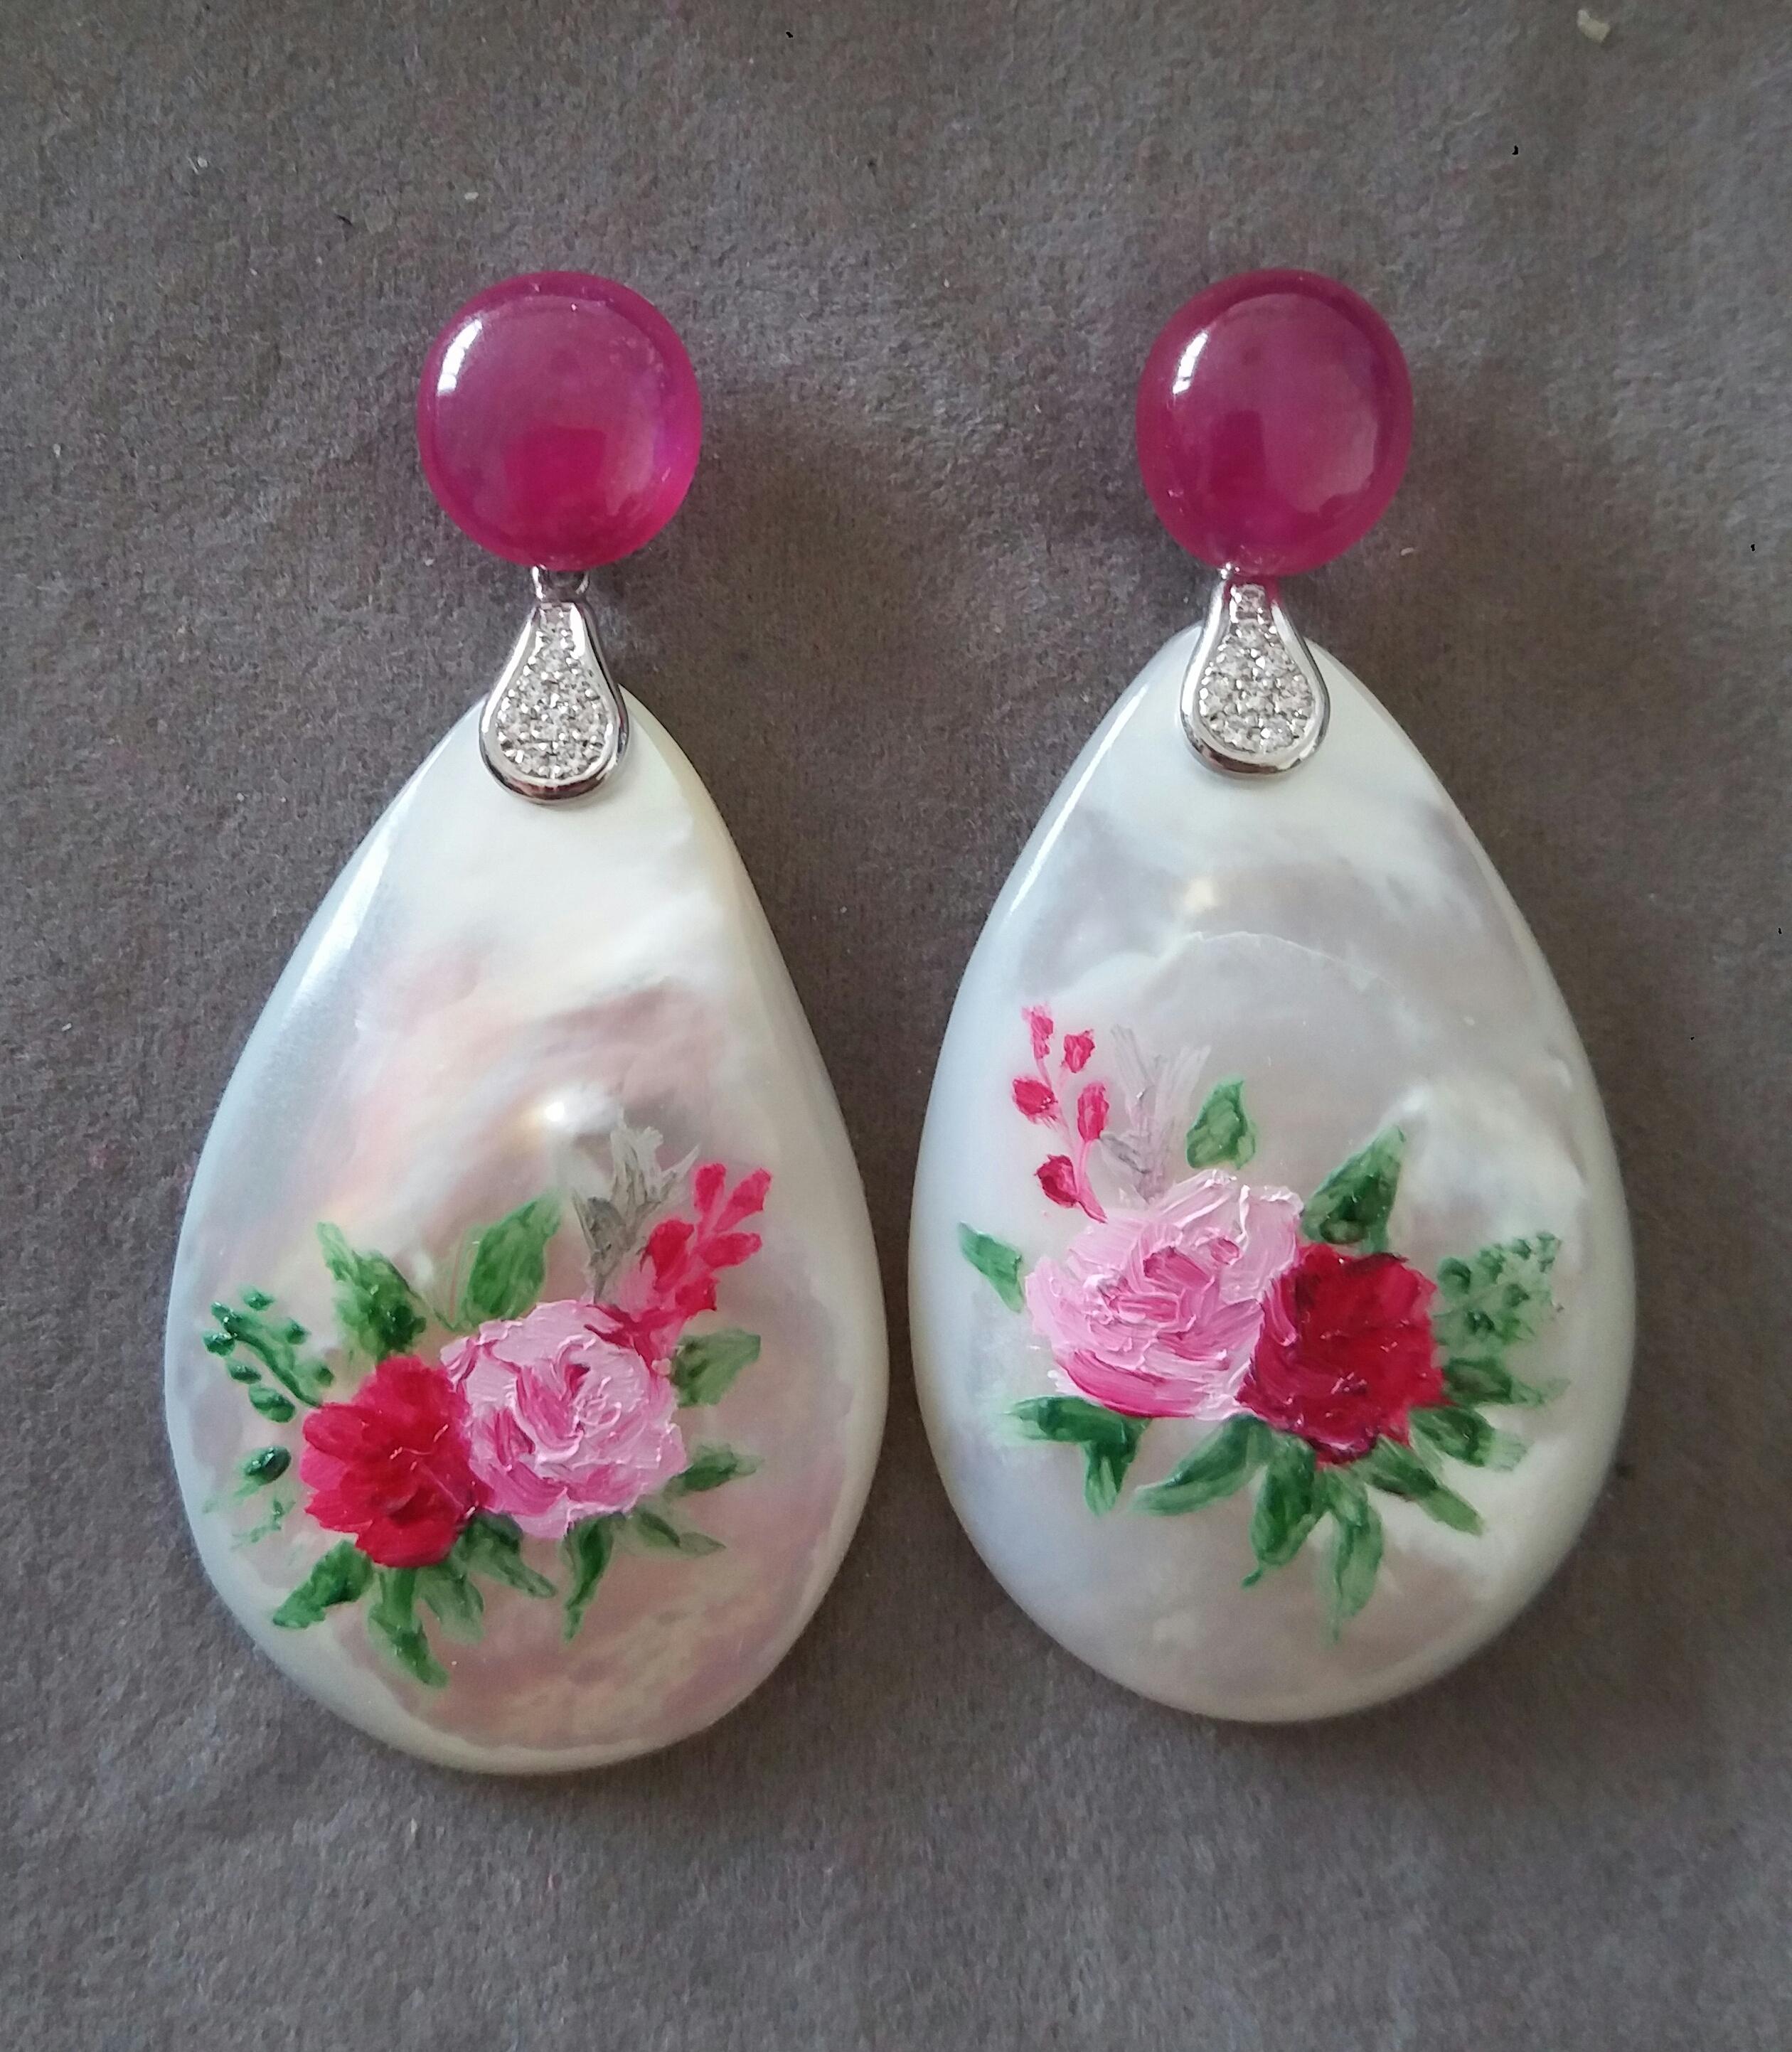 Vintage pair of hand painted pear shape Mother of Pearls  measuring 28x44 mm depicting 1 red rose and 1 pink rose with green foliage ,suspended from 2 Ruby Oval cabs measuring  11x12 mm  by 2 elements in 14 K white gold and 16 small round brilliant